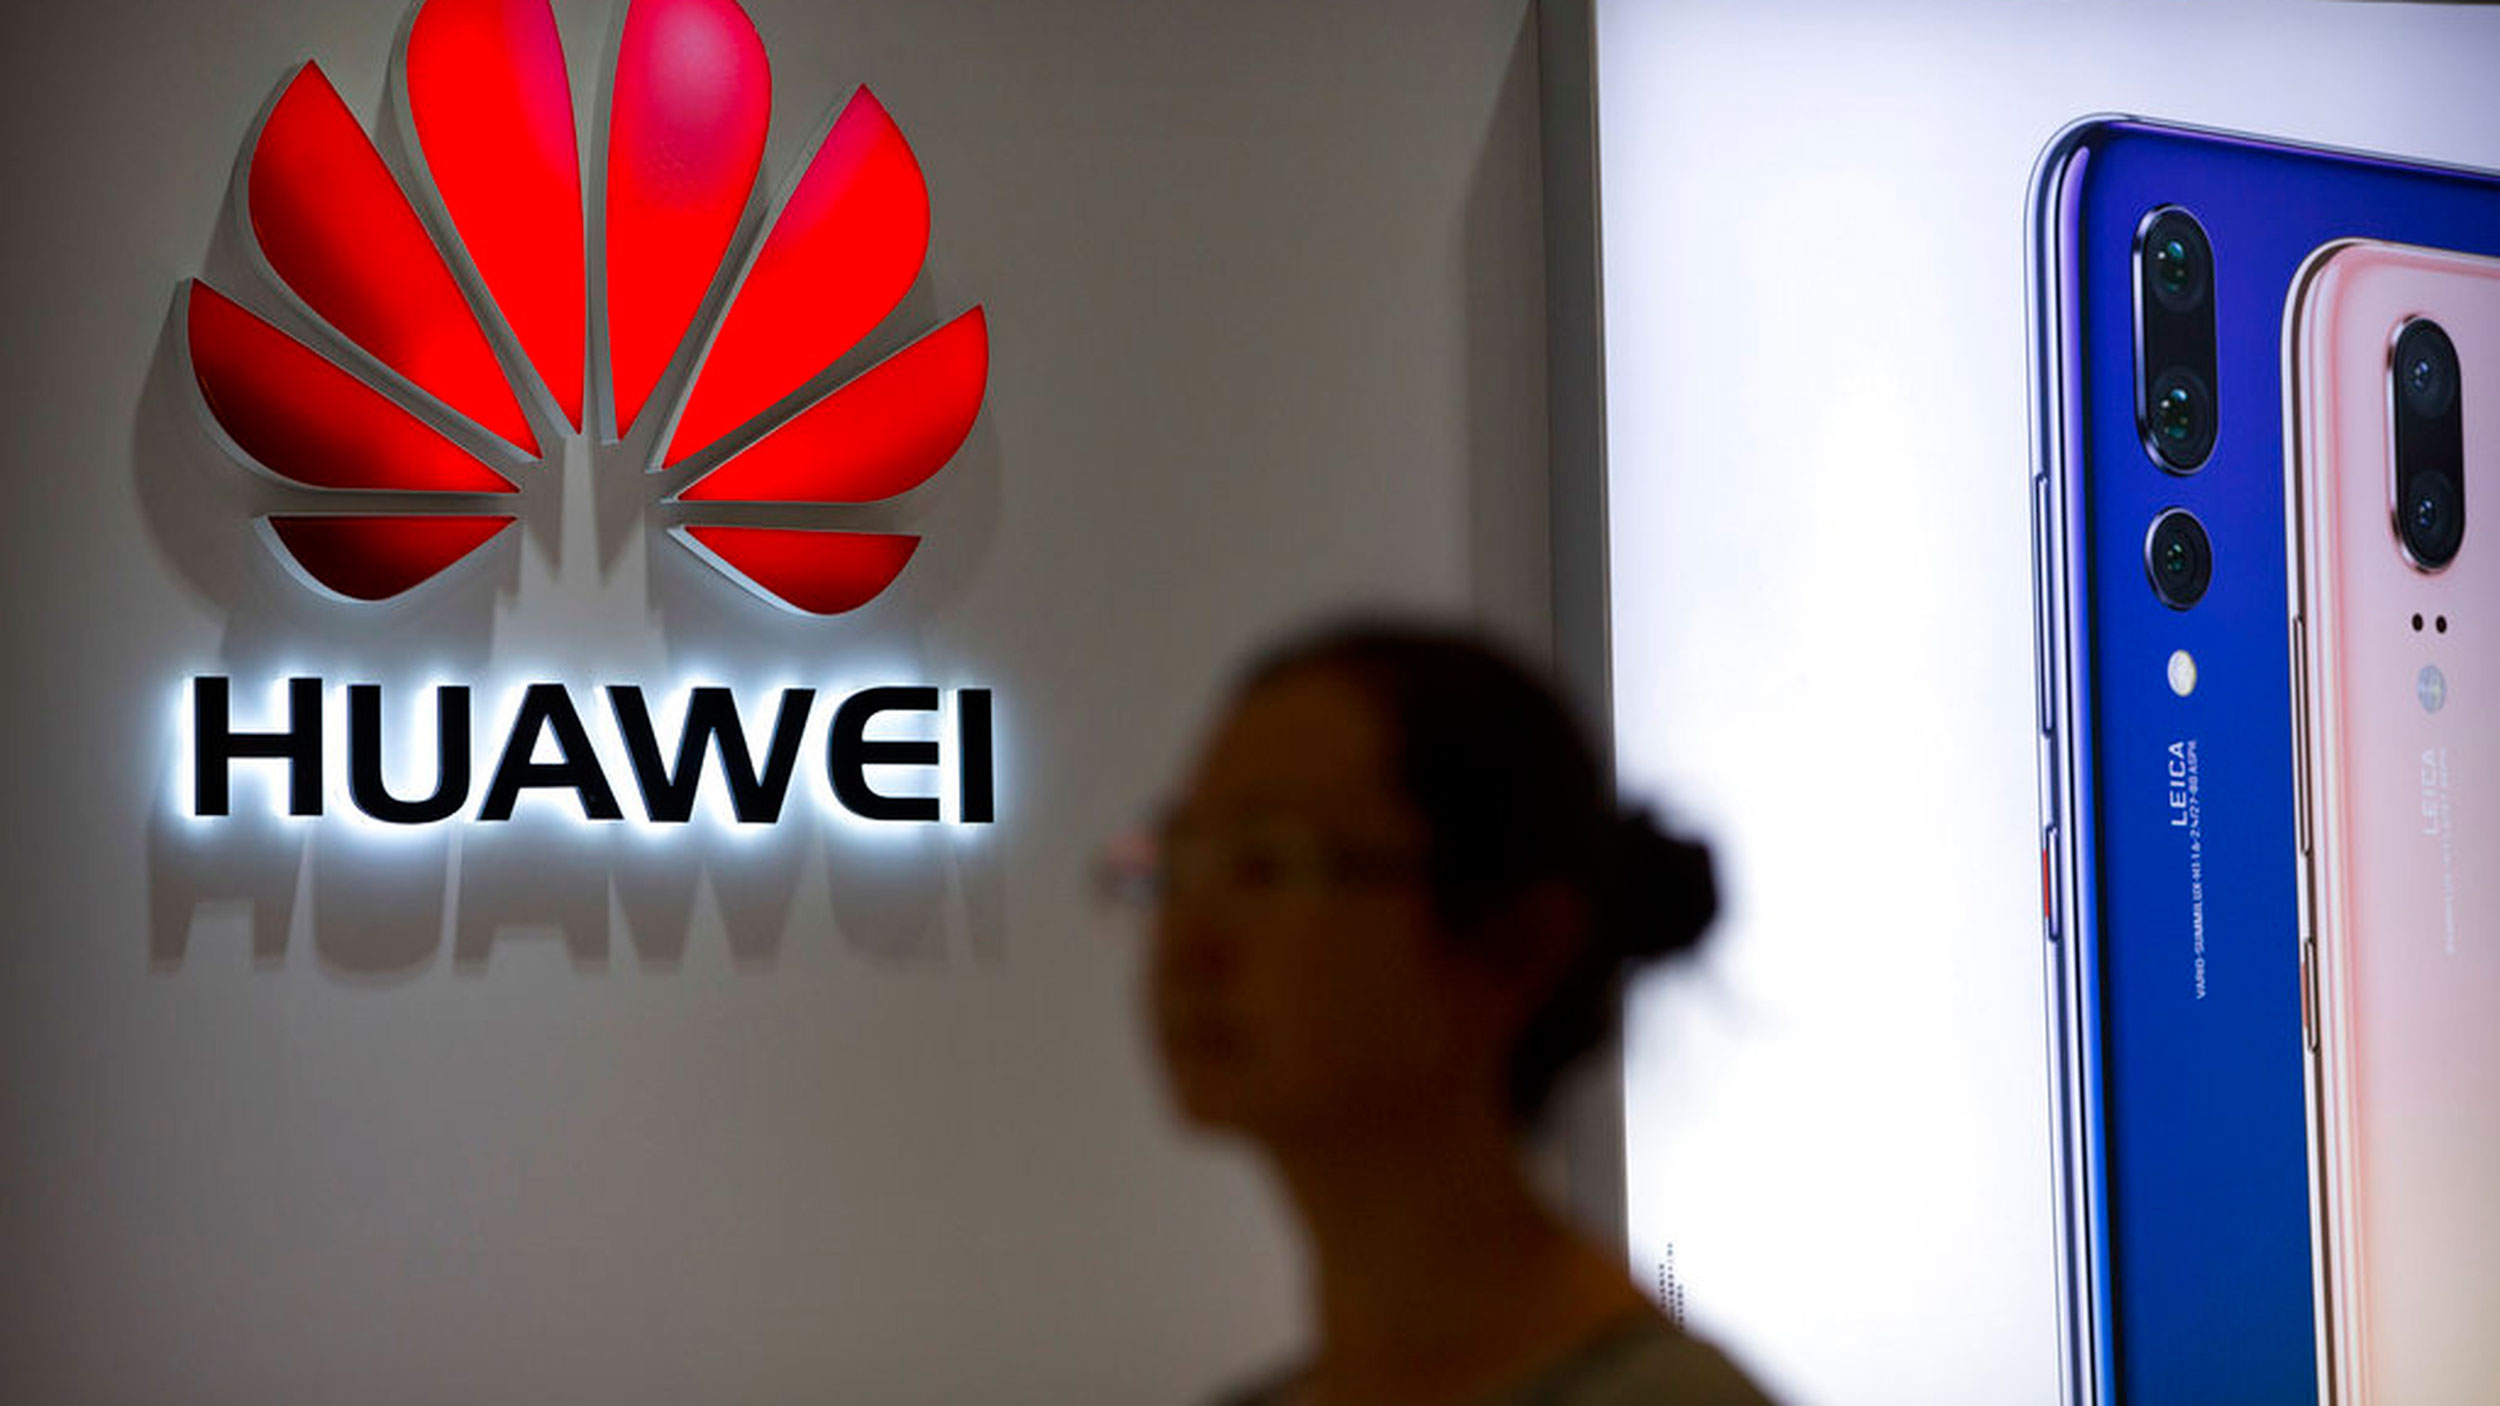 The Trump administration had placed Huawei and its affiliates on its blacklist, a move that banned the Chinese telecom equipment company from purchasing parts and components from American firms without the US government approval. 
